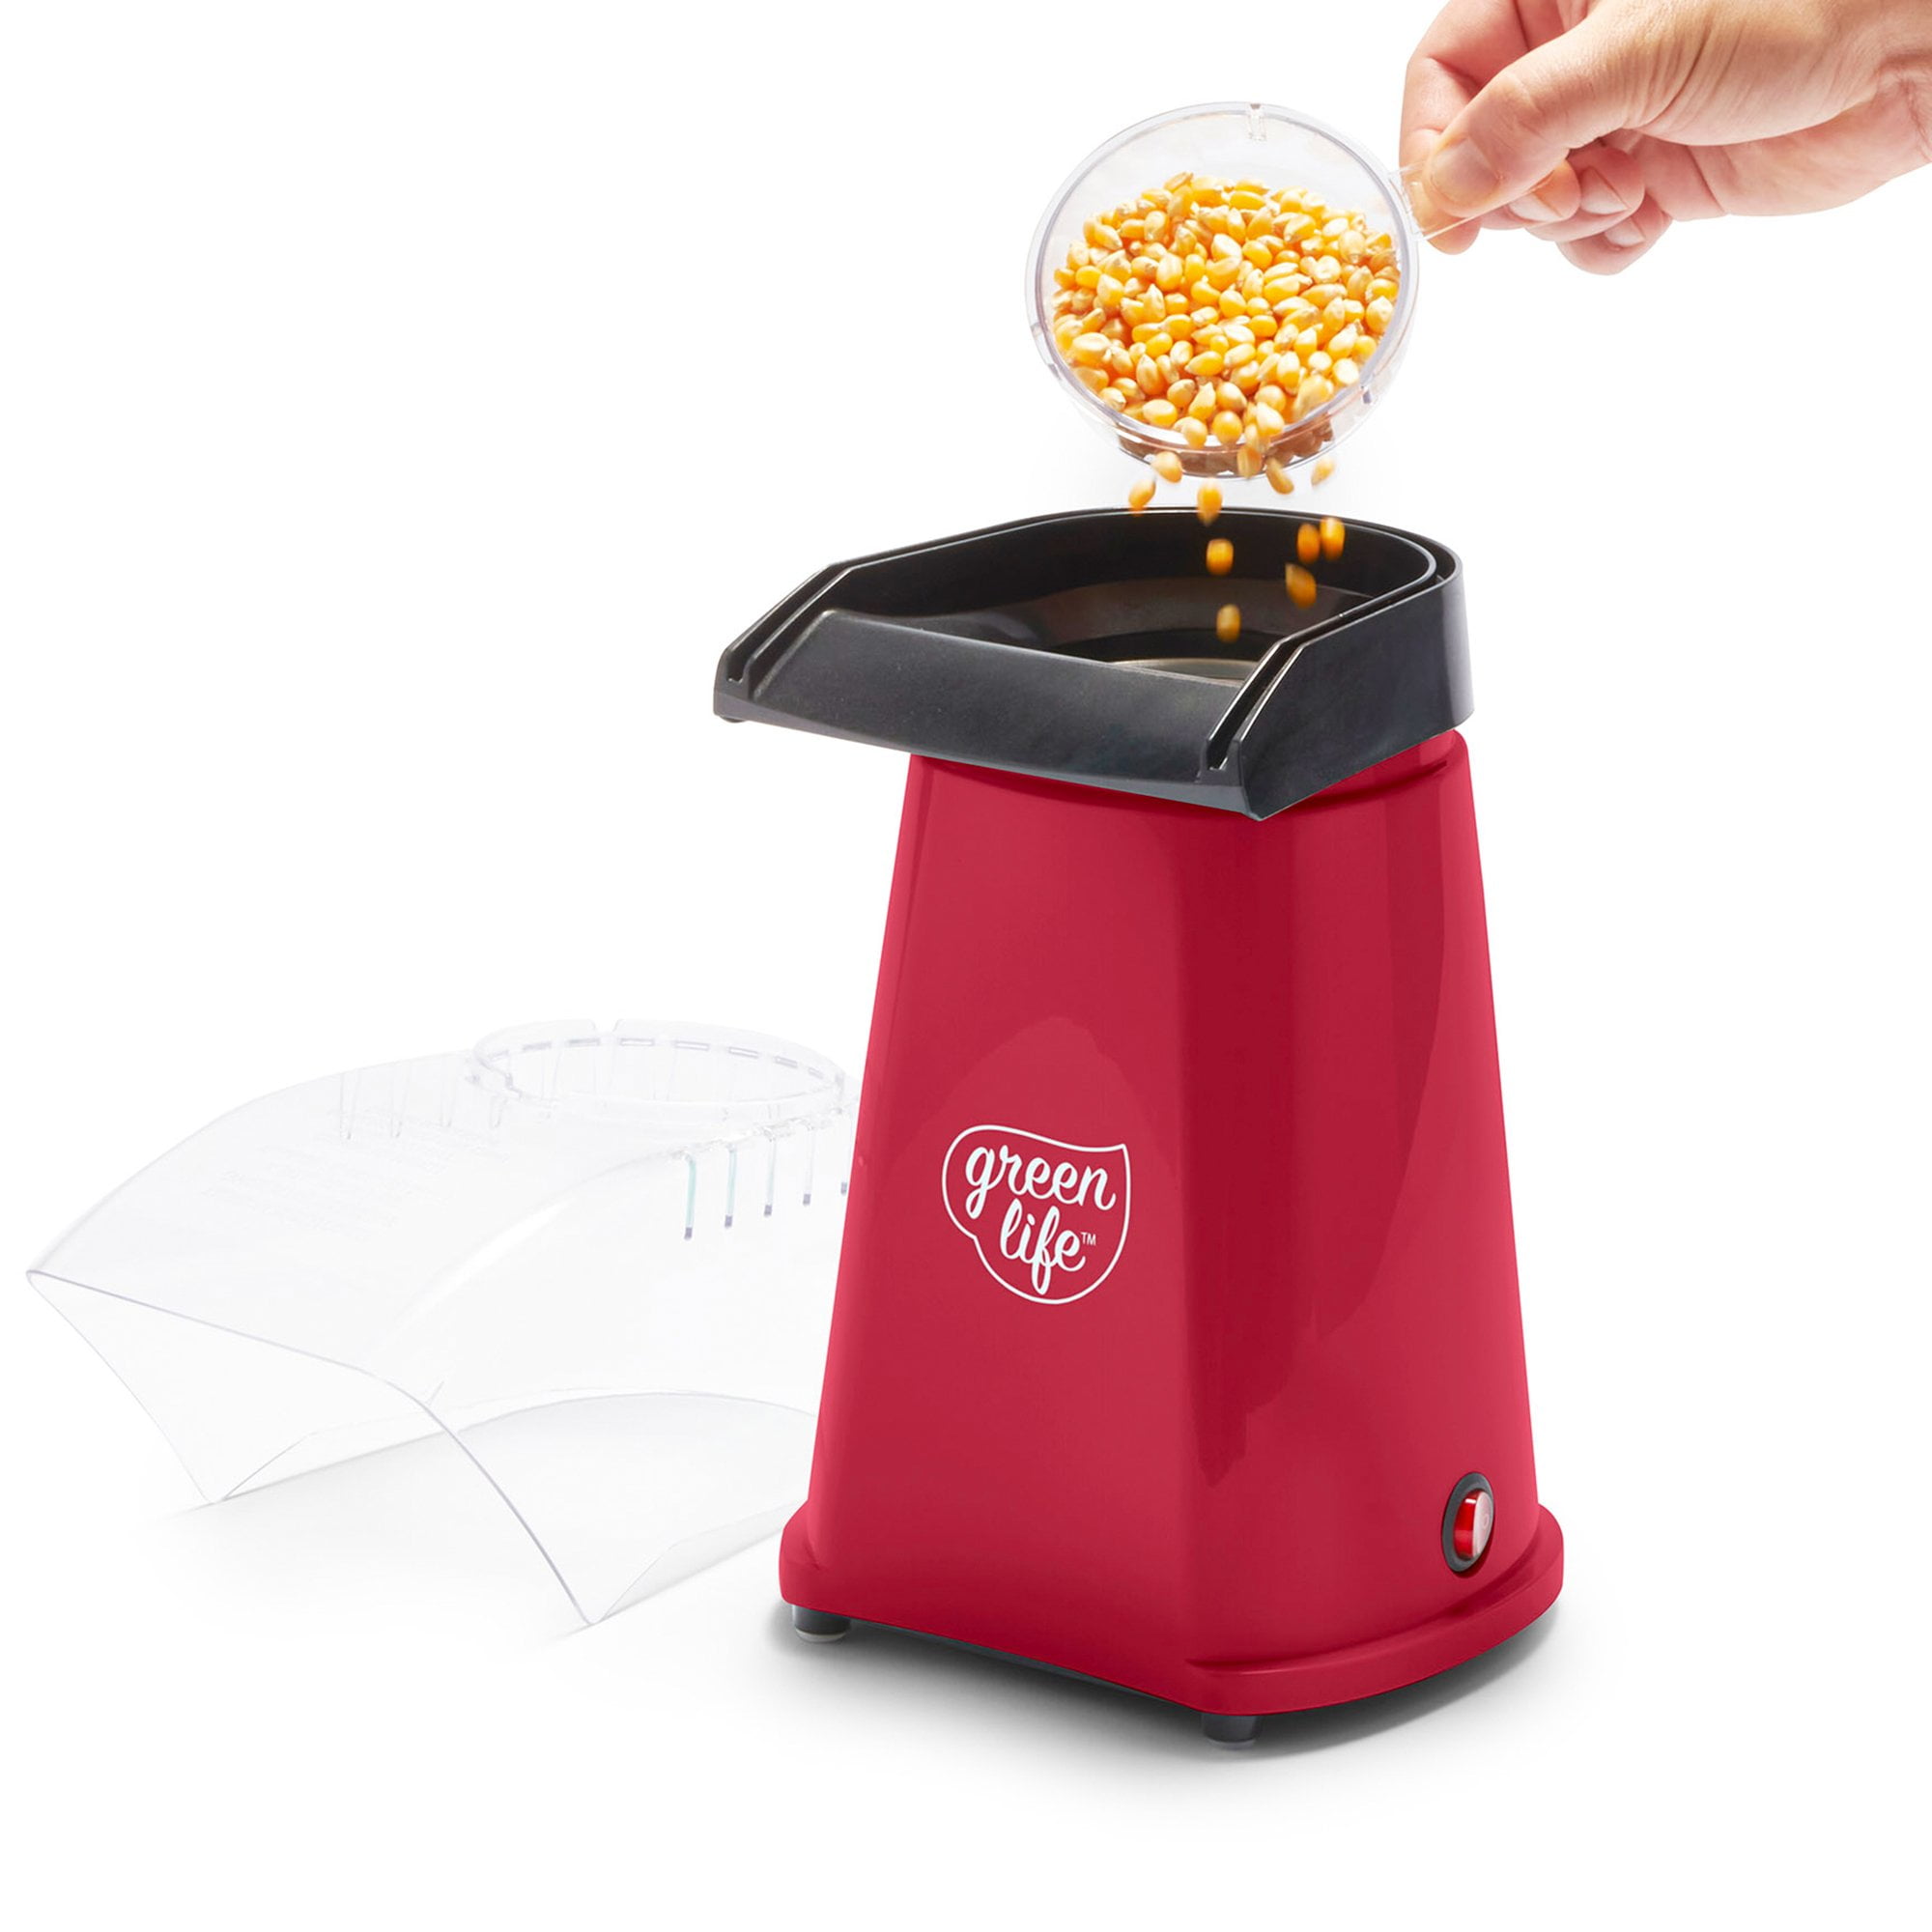 Greenlife Now Showing 18 Cup Electric Popcorn Maker Red Walmart Com